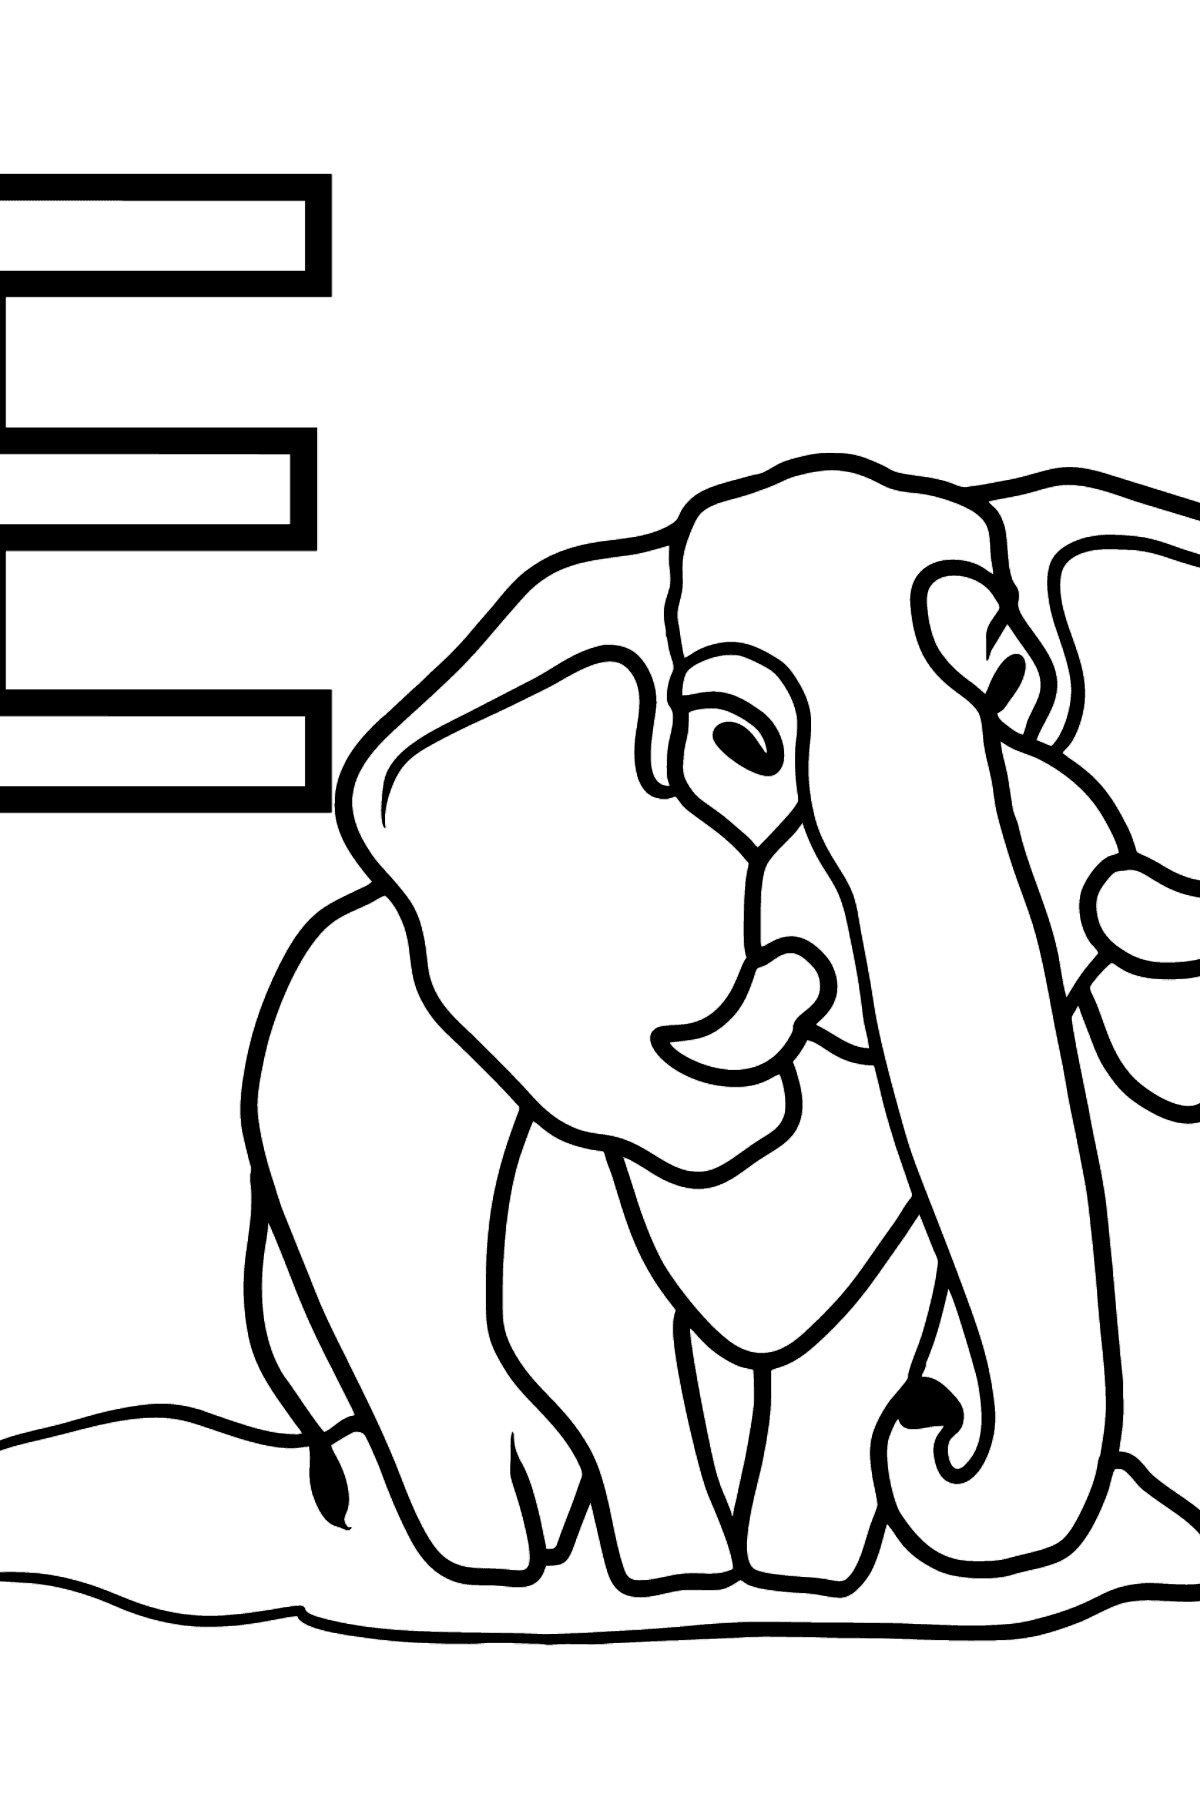 English Letter E coloring pages - ELEPHANT - Coloring Pages for Kids